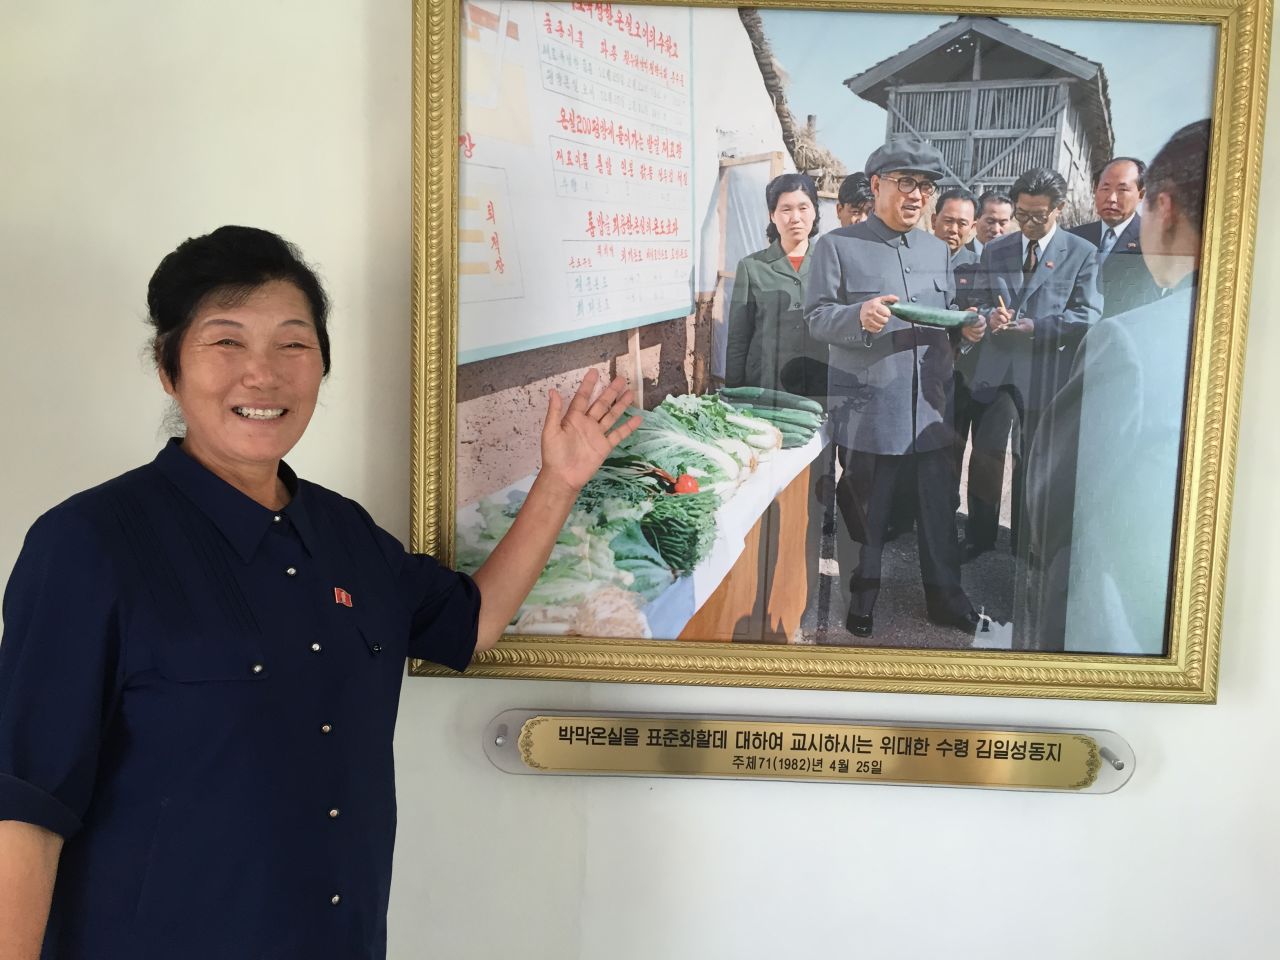 Kim Myong Jon has earned a prominent position in North Korea's agricultural community. She is something of a national celebrity. Pictures in the farm museum show many of her 44 meetings over the years -- with all three North Korean leaders.